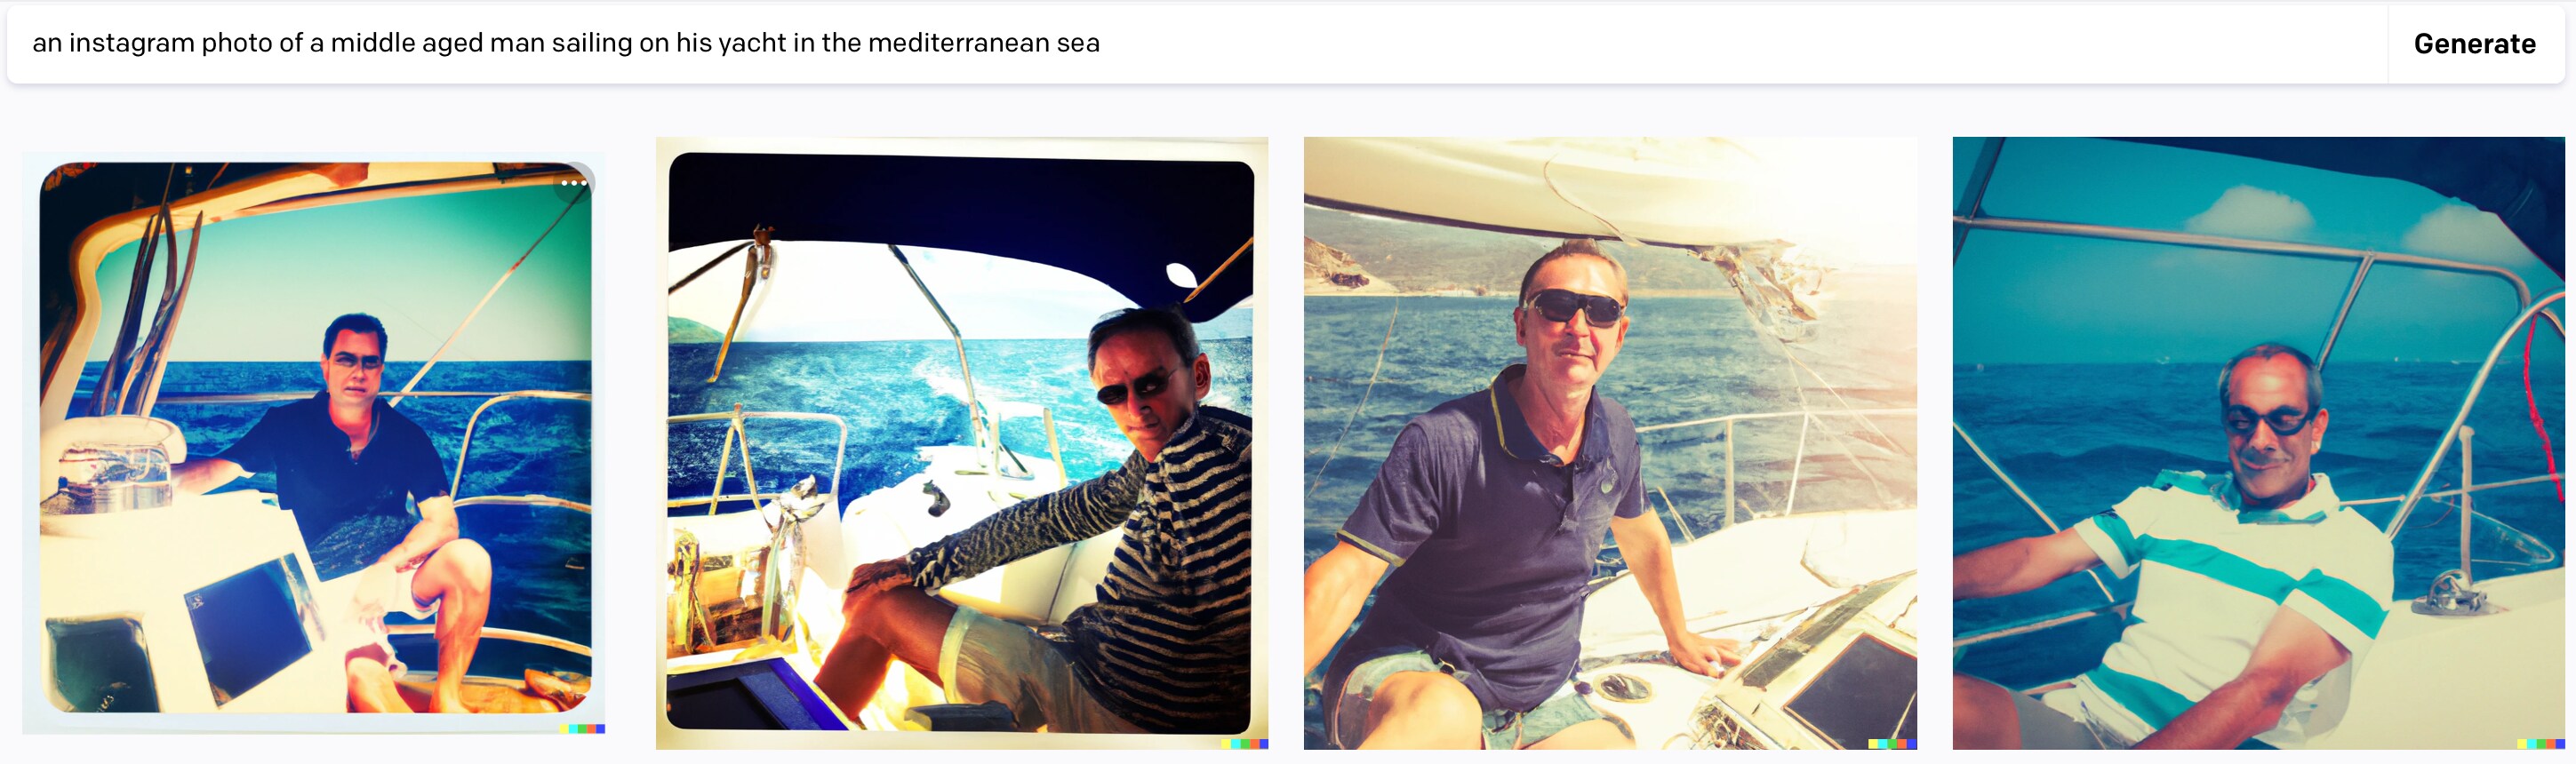 Machine generated images based on the text prompt “an instagram photo of a middle aged man sailing on his yacht in the mediterranean sea.” 